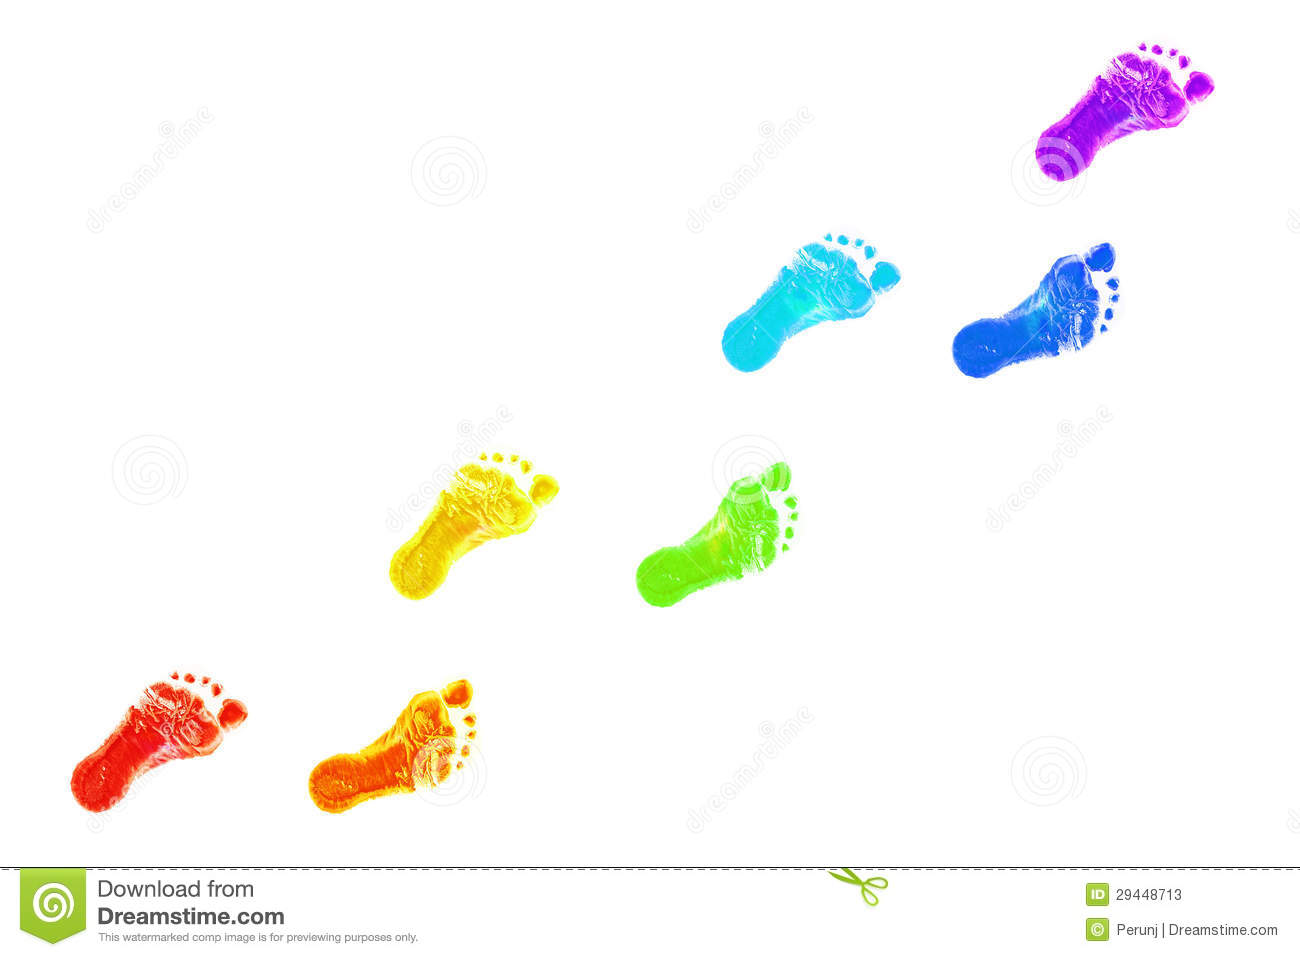 Baby Foot Prints All Colors Of The Rainbow  The Joyful Journey  On